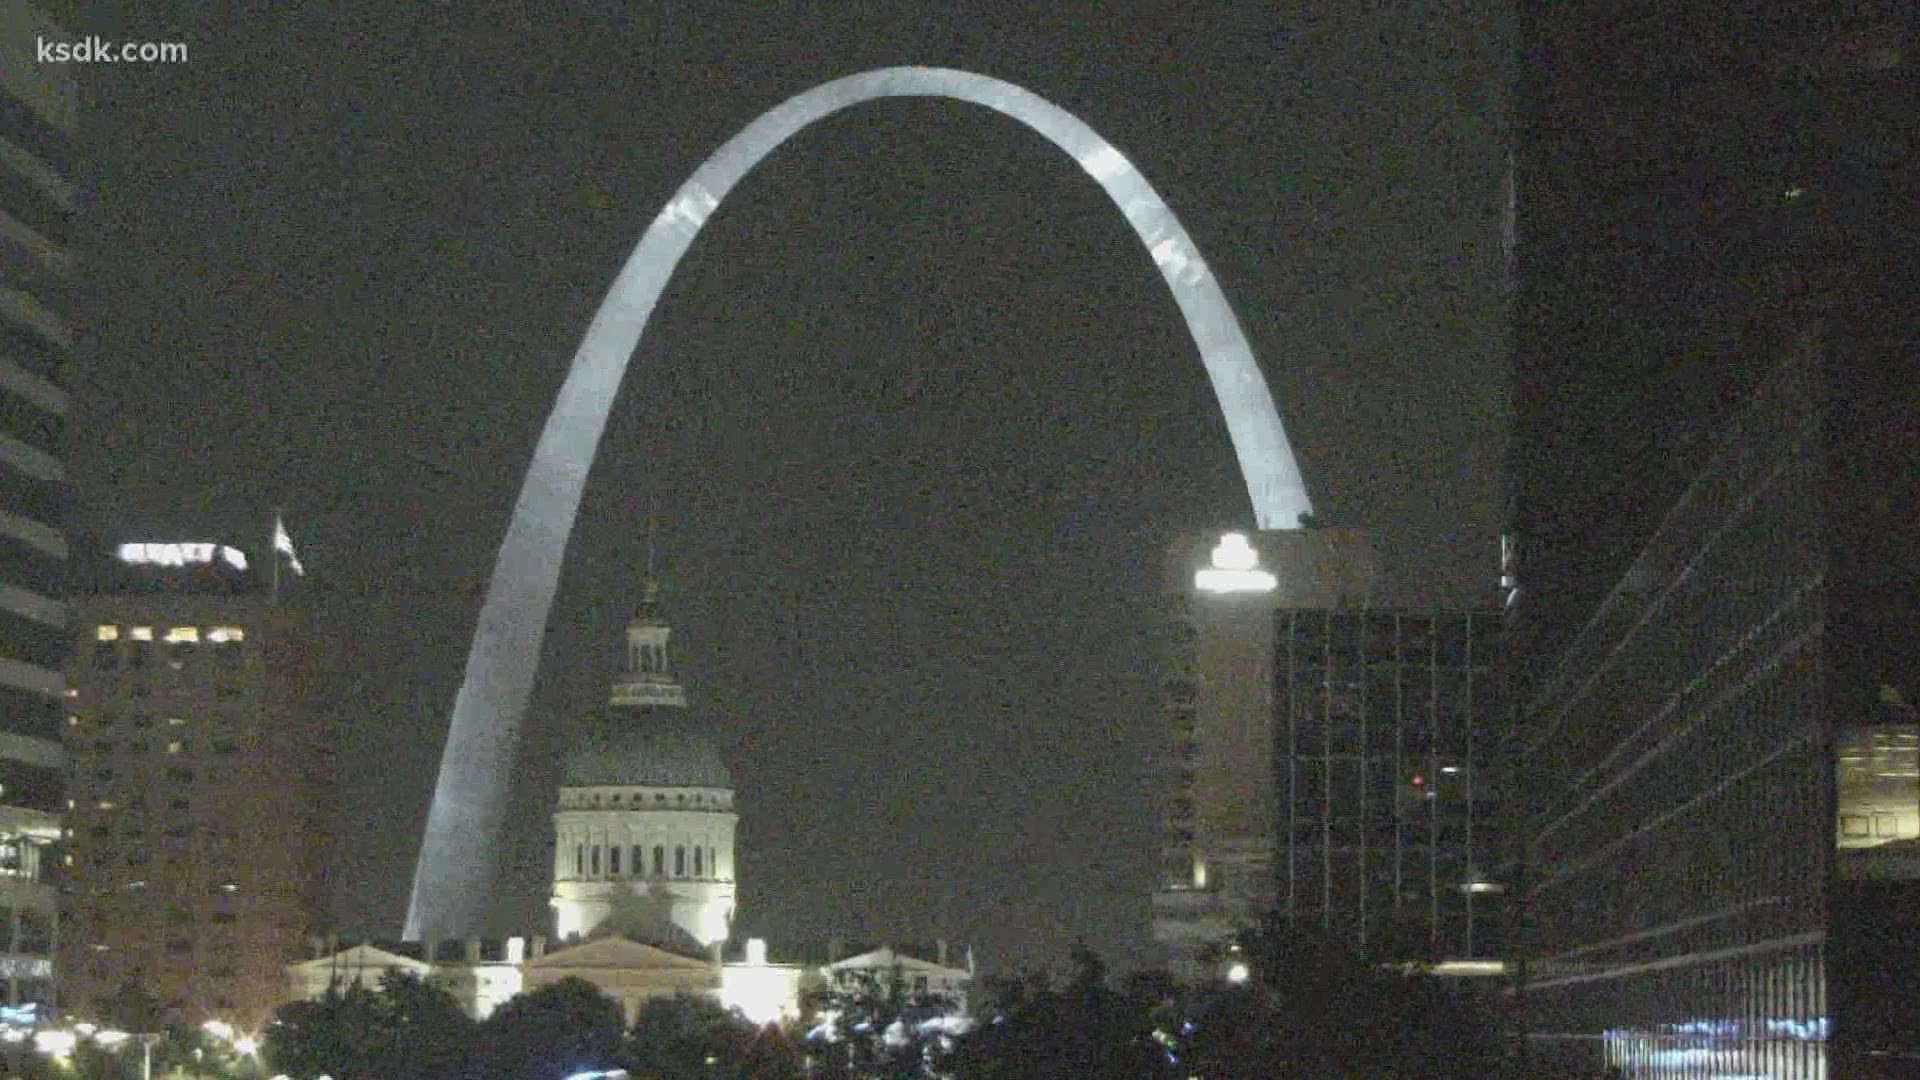 Officials at Gateway Arch National Park said they turn the lights off to avoid possibly disorienting the birds